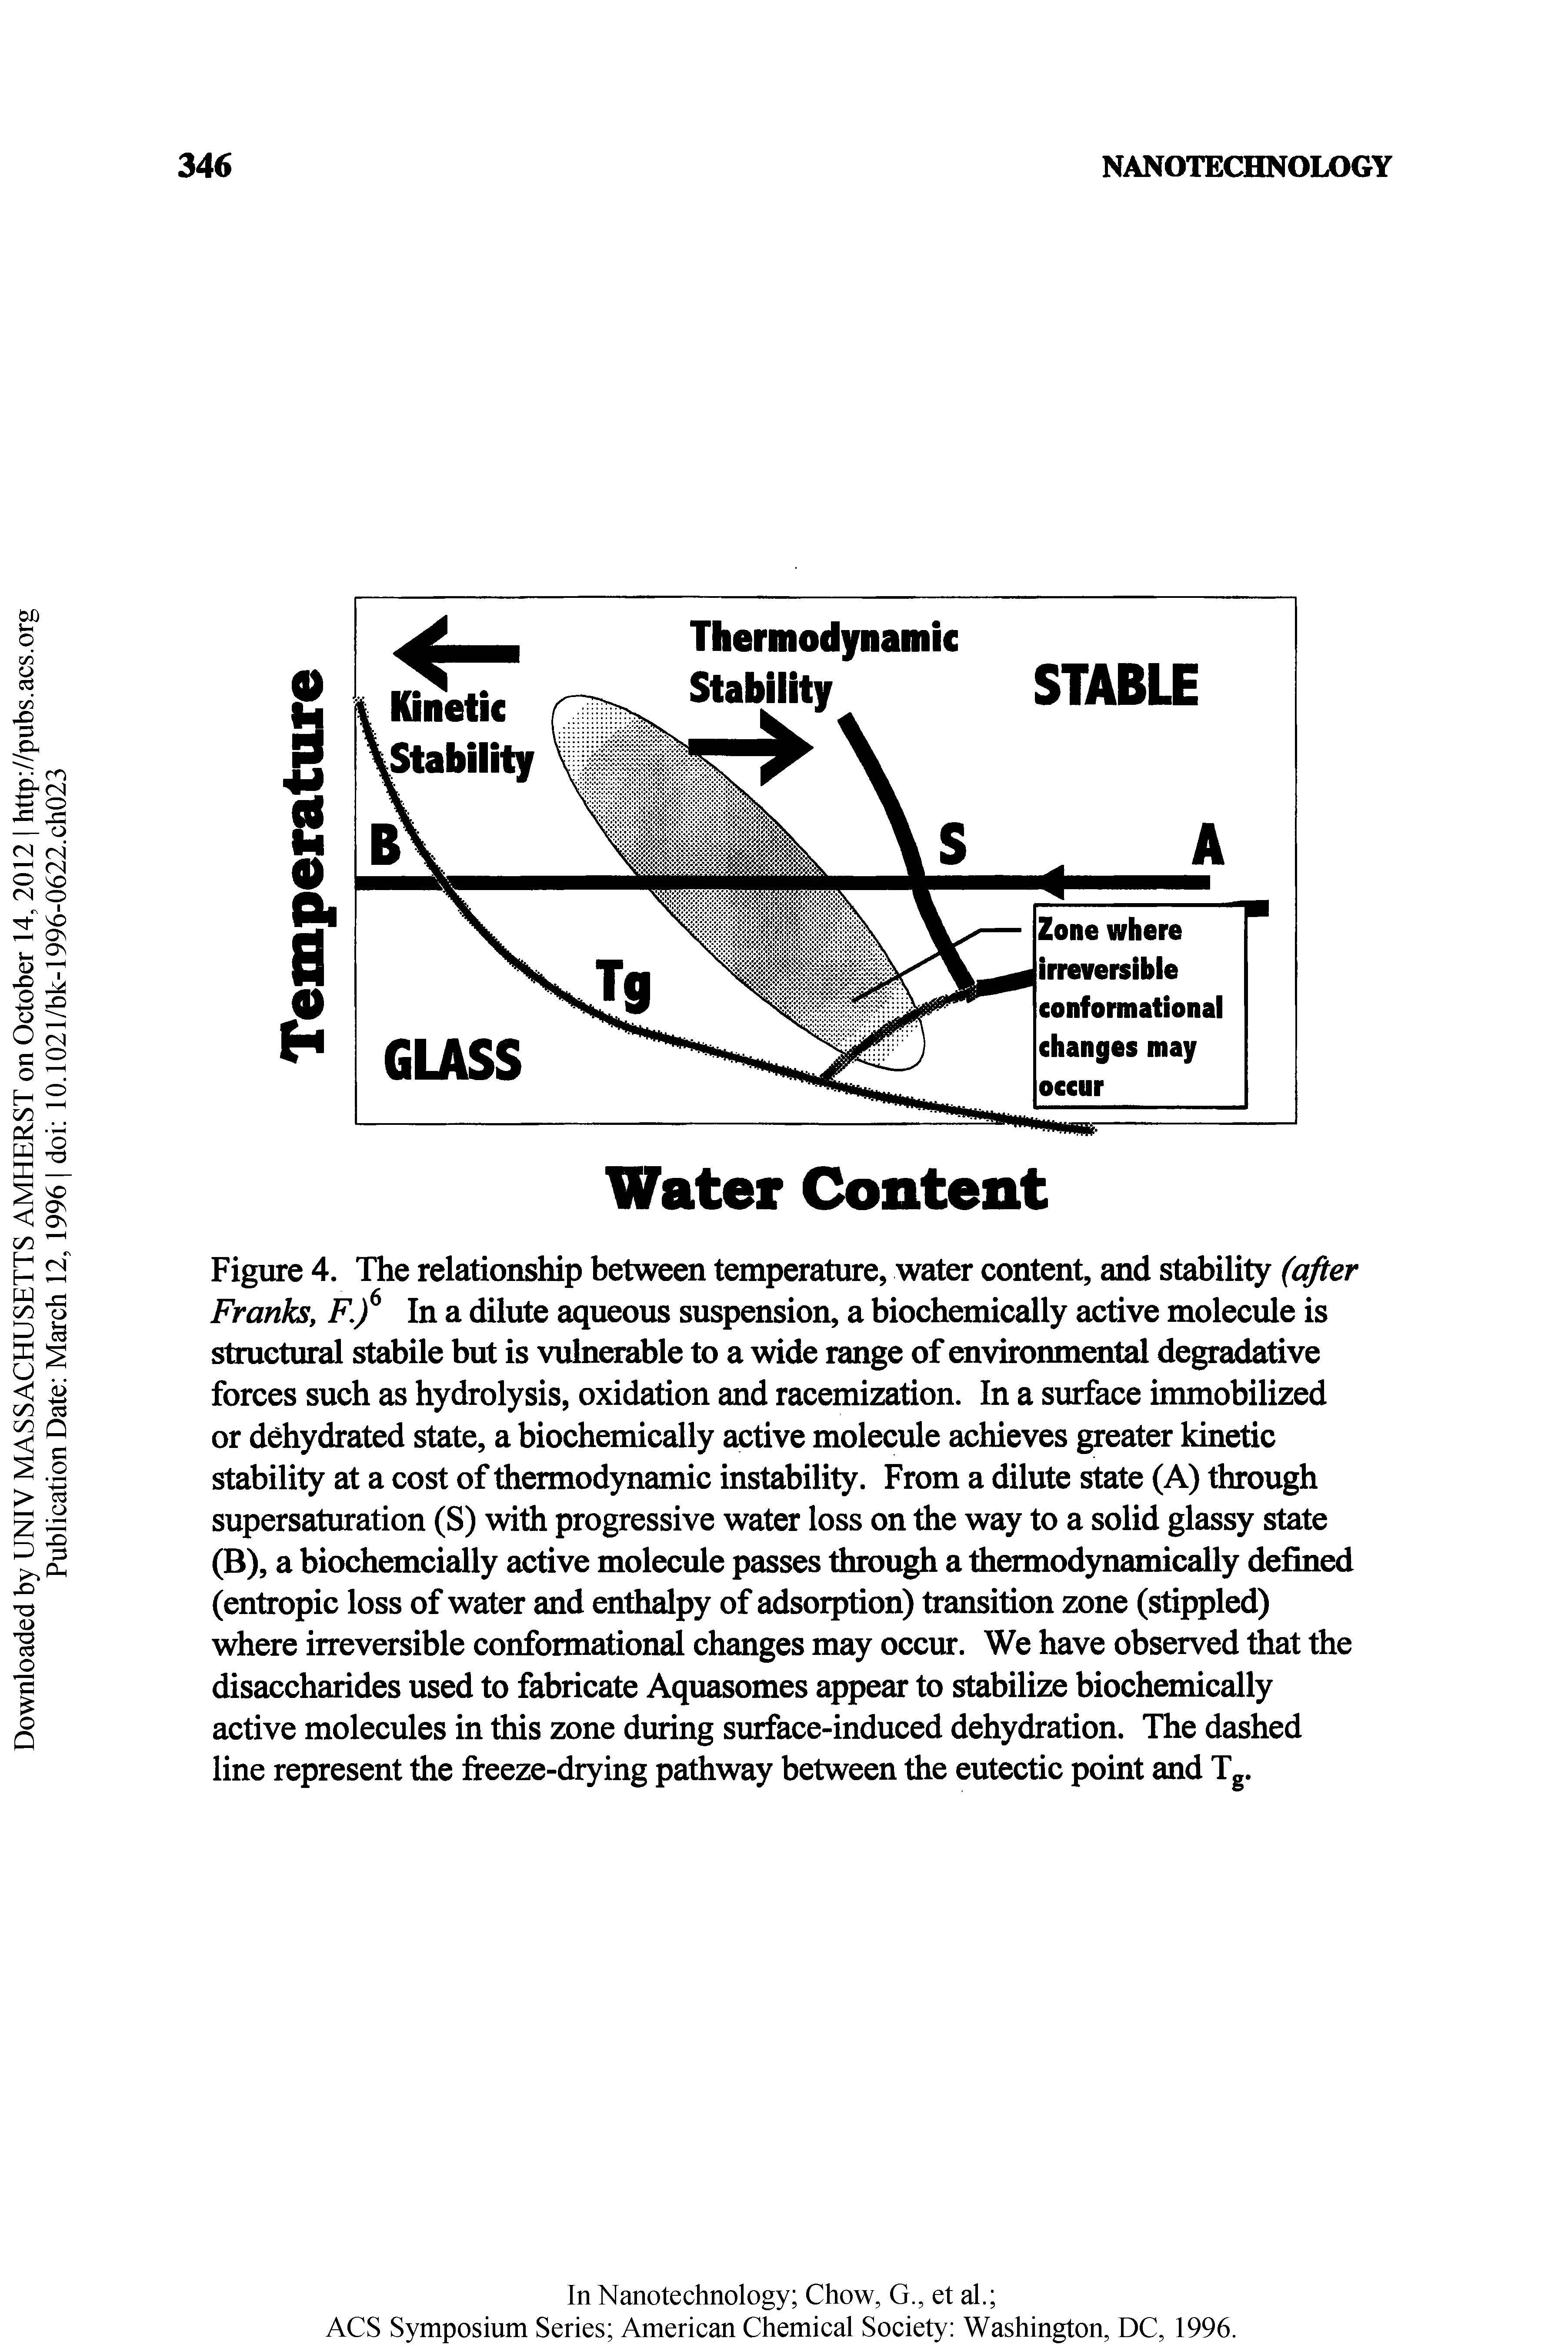 Figure 4. The relationship between temperature, water content, and stability (after Franks, F.f In a dilute aqueous suspension, a biochemically active molecule is structural stabile but is vulnerable to a wide range of environmental degradative forces such as hydrolysis, oxidation and racemization. In a surface immobilized or dehydrated state, a biochemically active molecule achieves peater kinetic stability at a cost of thermodynamic instability. From a dilute state (A) through supersaturation (S) with progressive water loss on the way to a solid glassy state (B), a biochemcially active molecule passes through a thermodynamically defined (entropic loss of water and enthalpy of adsorption) transition zone (stippled) where irreversible conformational changes may occur. We have observed that the disaccharides used to fabricate Aquasomes appear to stabilize biochemically active molecules in this zone during surface-induced dehydration. The dashed line represent the freeze-drying pathway between the eutectic point and Tg.